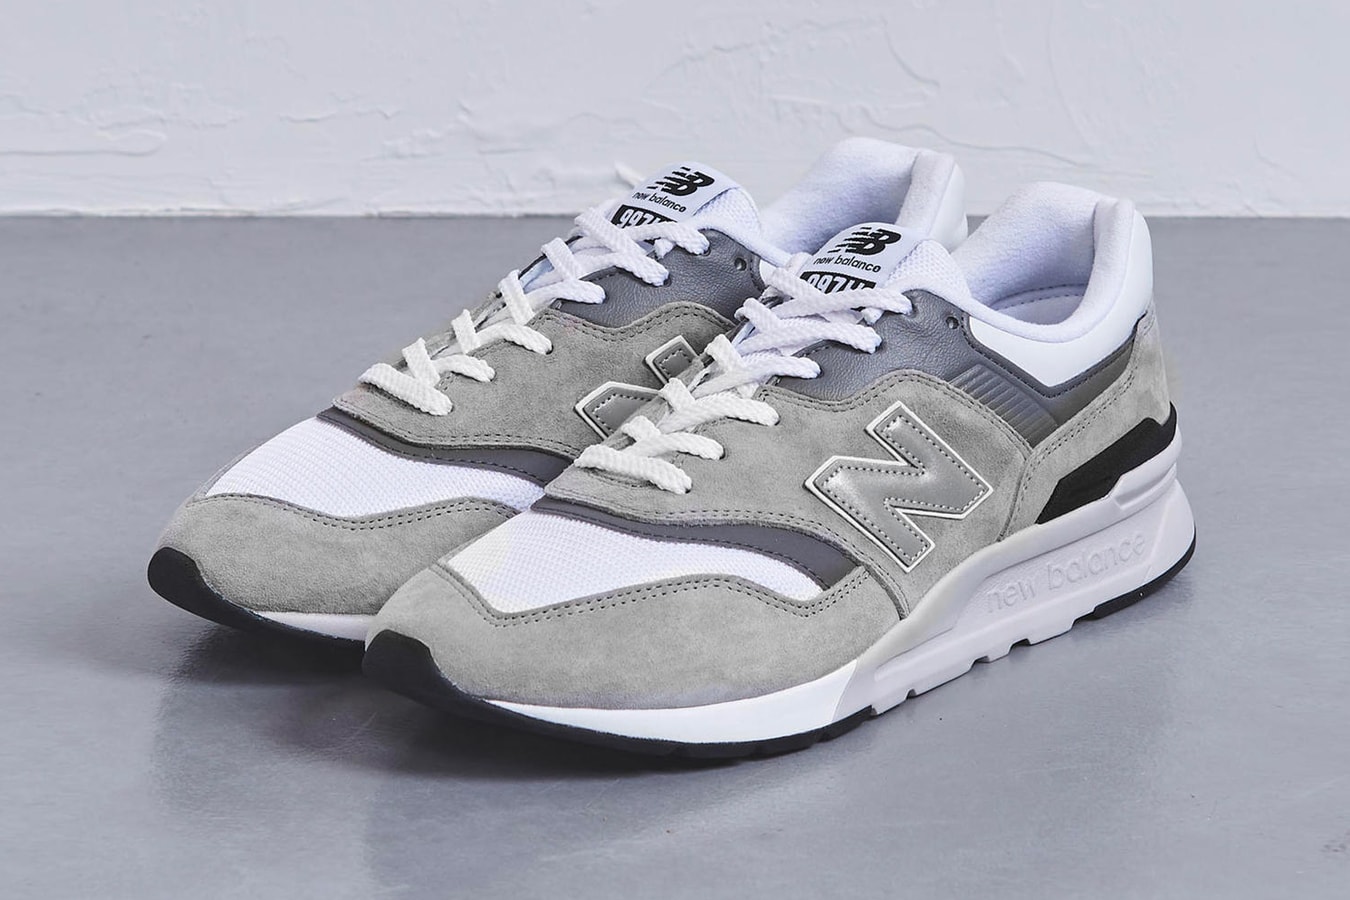 New Balance 997H Receives United Arrows Upgrade | Hypebeast